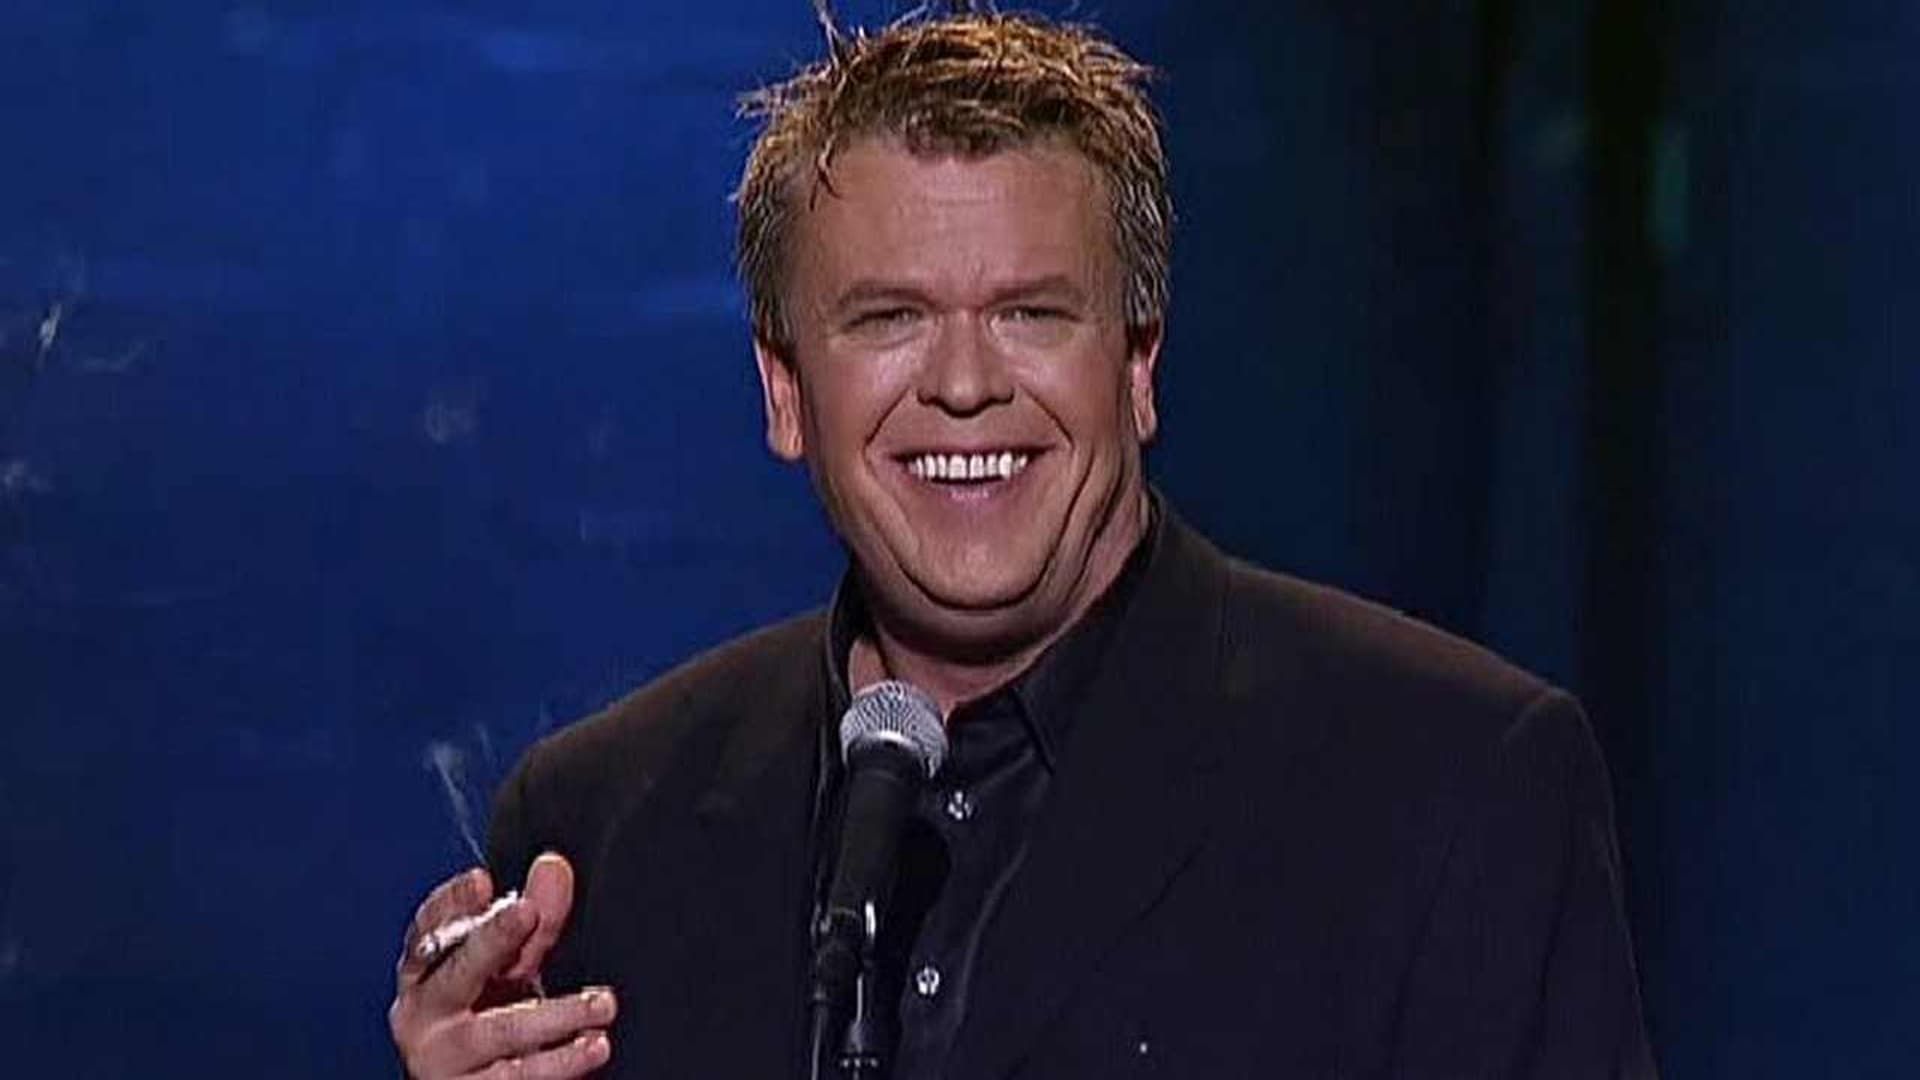 Ron White: They Call Me Tater Salad background